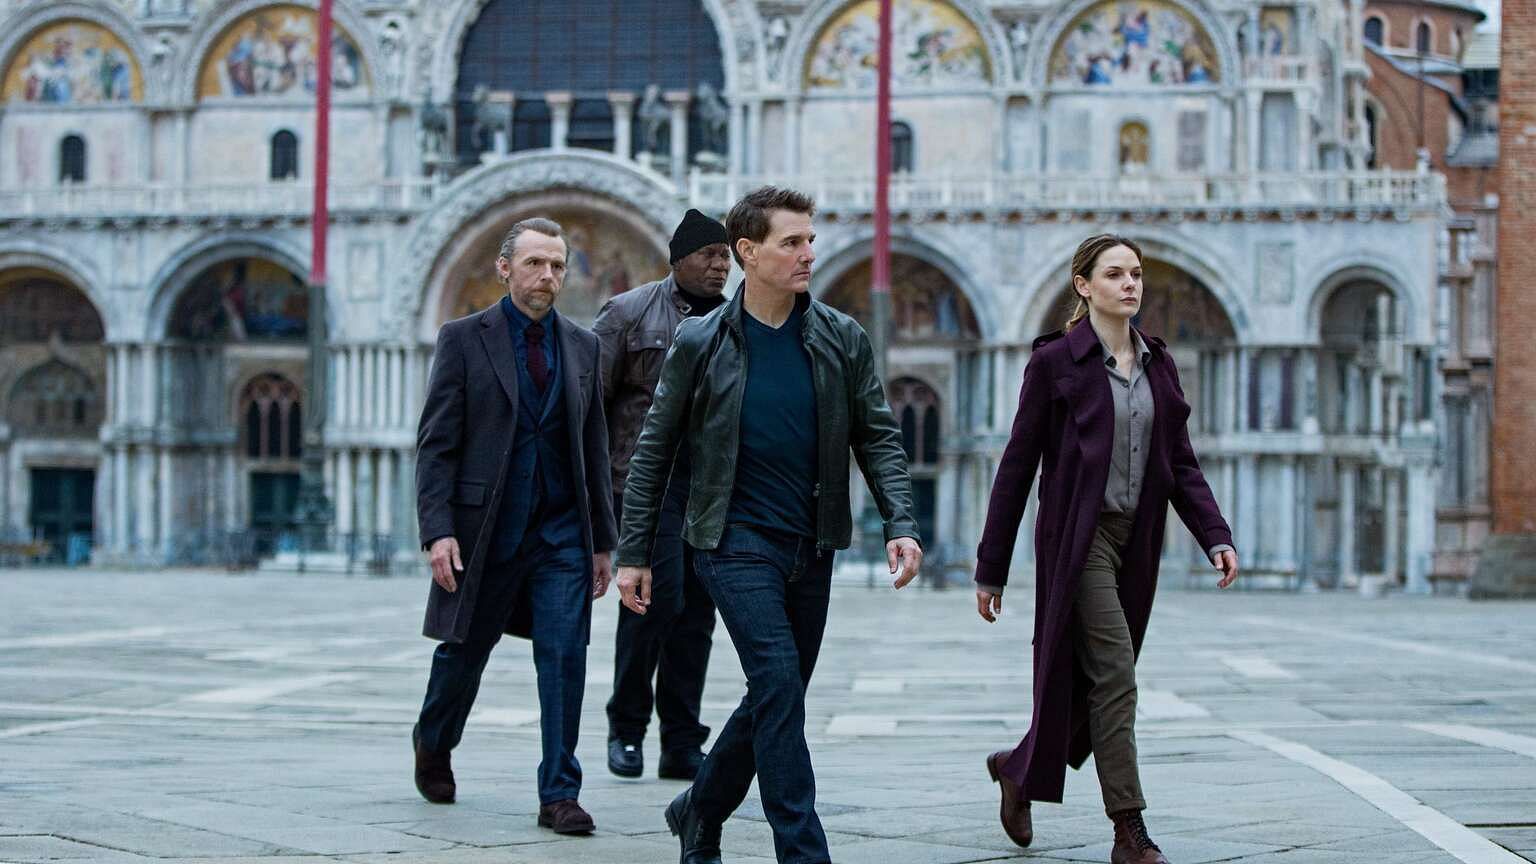 Tom Cruise voices concern over theatrical placement of Mission Impossible 7 (Image via Paramount Pictures)